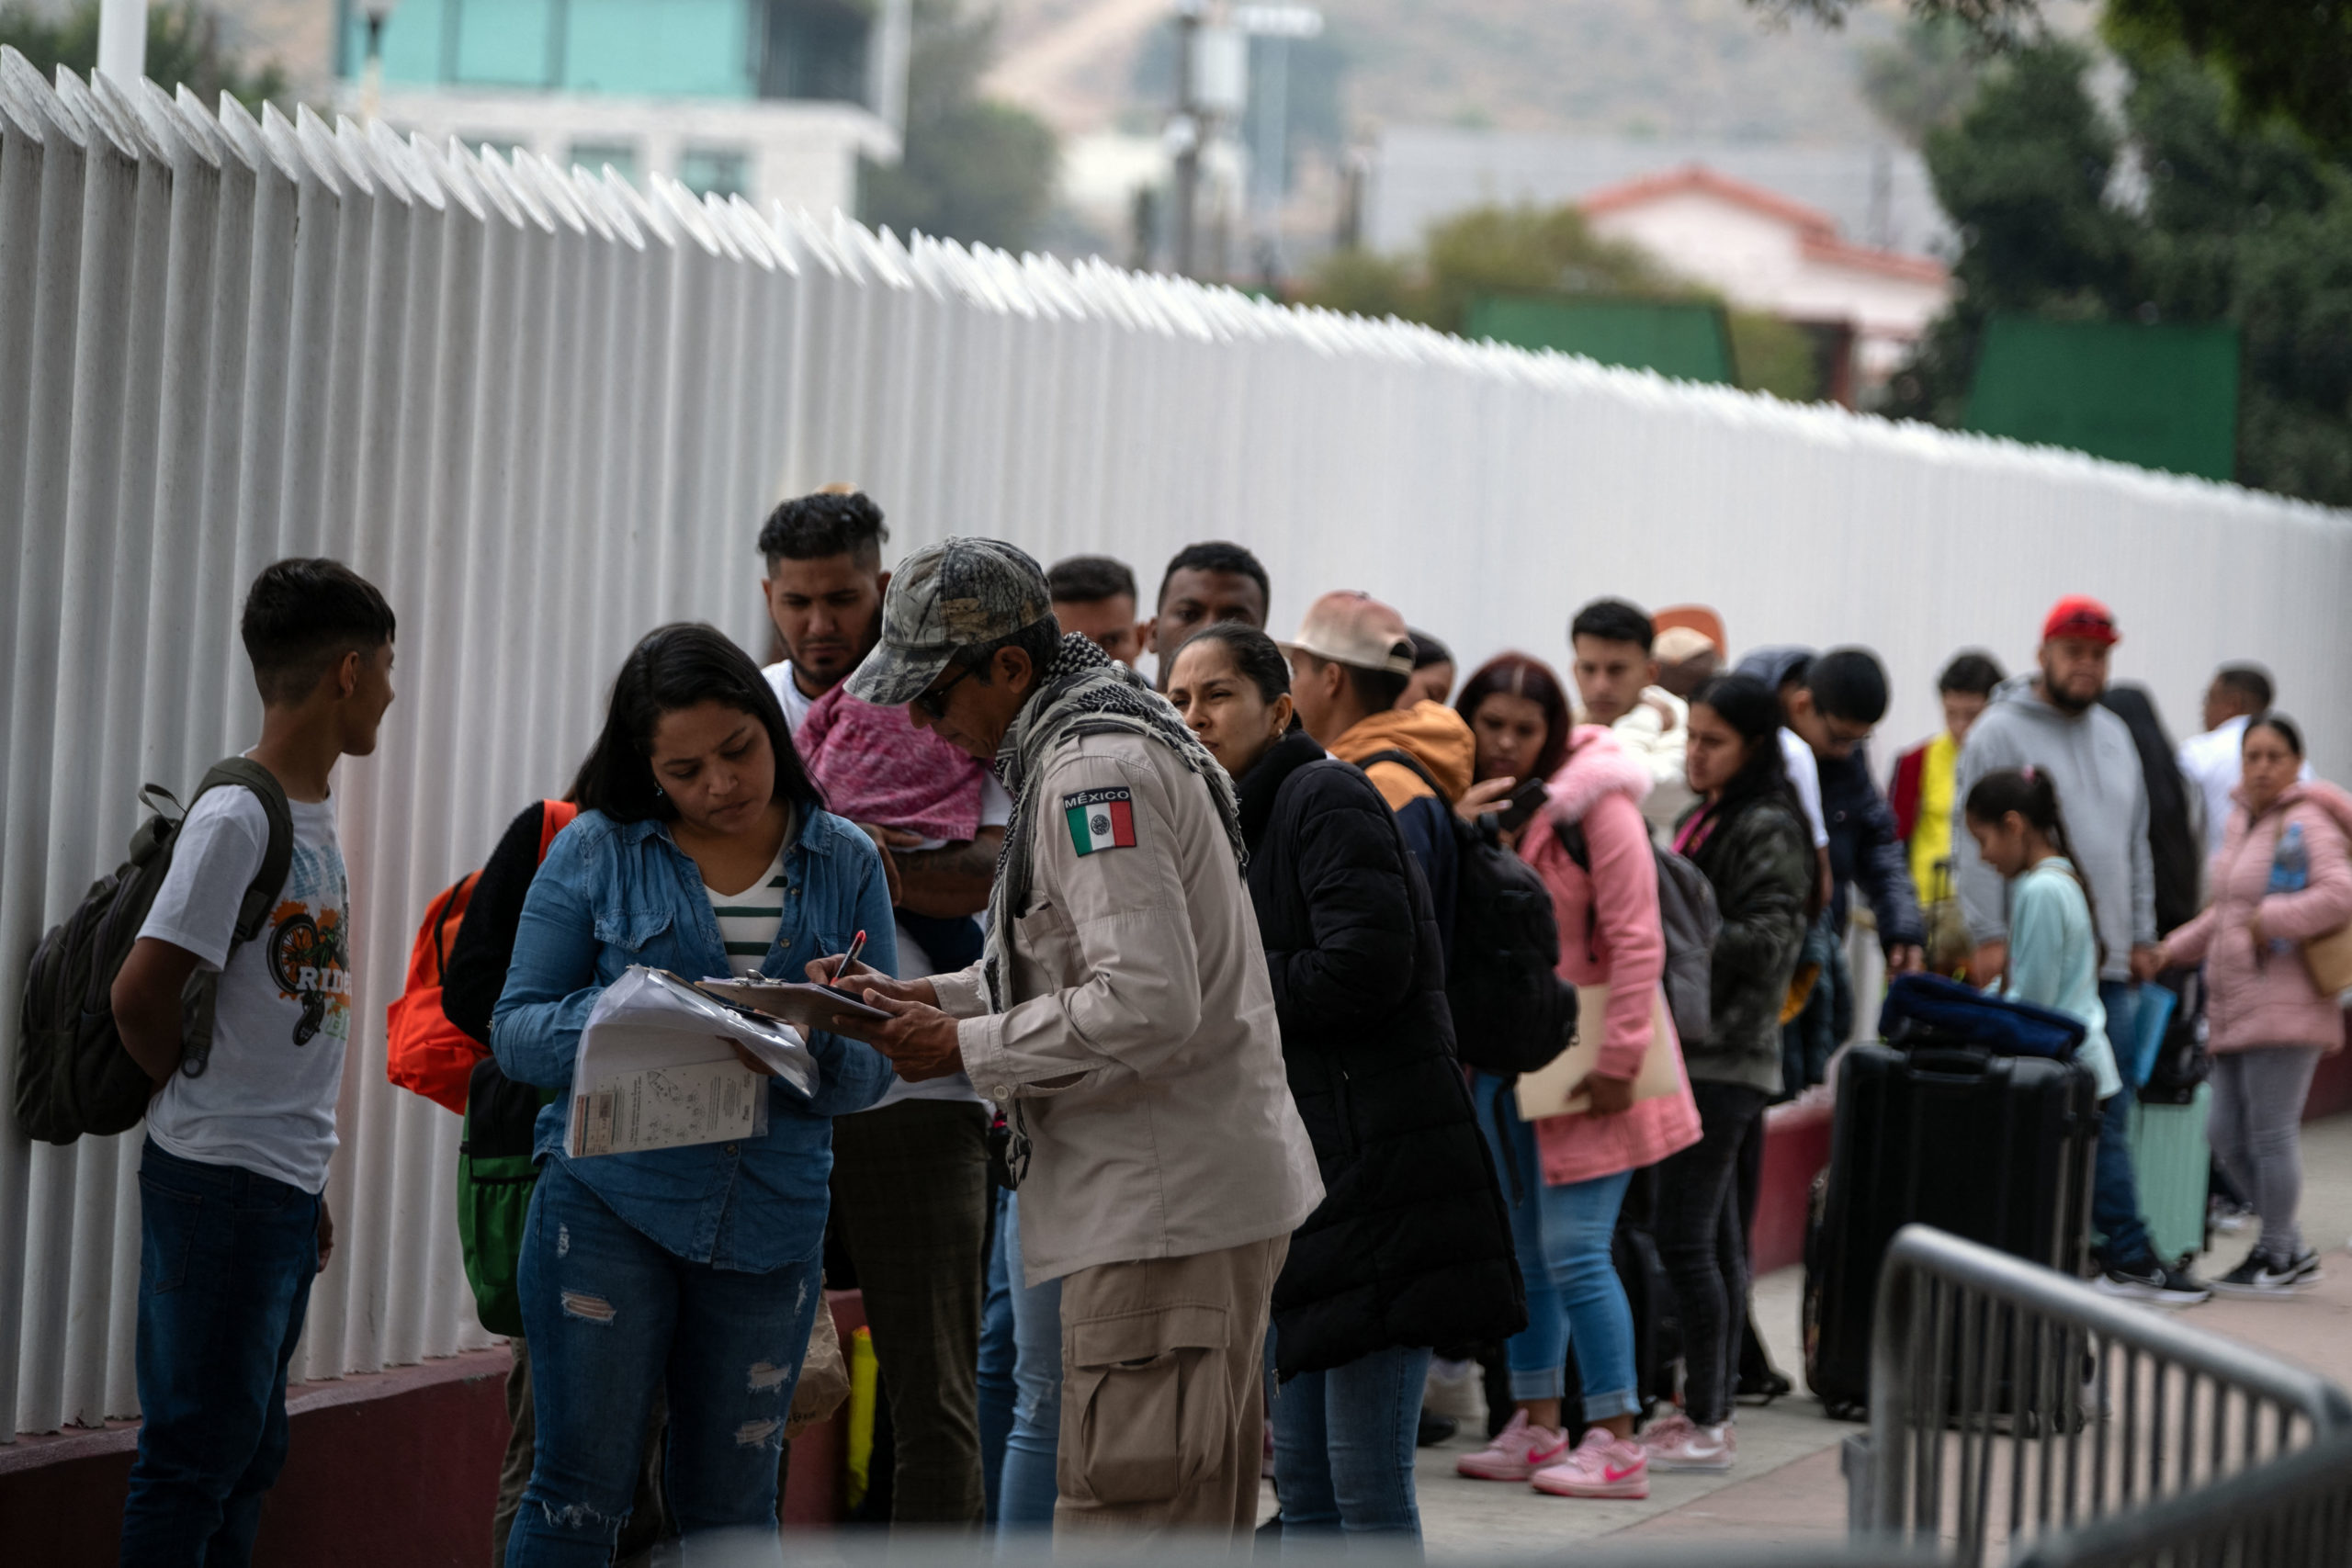 A Mexican migration official checks the papers of asylum seekers at the El Chaparral crossing port before they attend their appointment with US authorities at the US-Mexico border in Tijuana, Baja California State, Mexico, on June 5, 2024. President Joe Biden said Tuesday he had ordered sweeping new migrant curbs to "gain control" of the US-Mexico border, making a dramatic bid to neutralize one of his political weak spots in his reelection battle against Donald Trump. (Photo by GUILLERMO ARIAS/AFP via Getty Images)